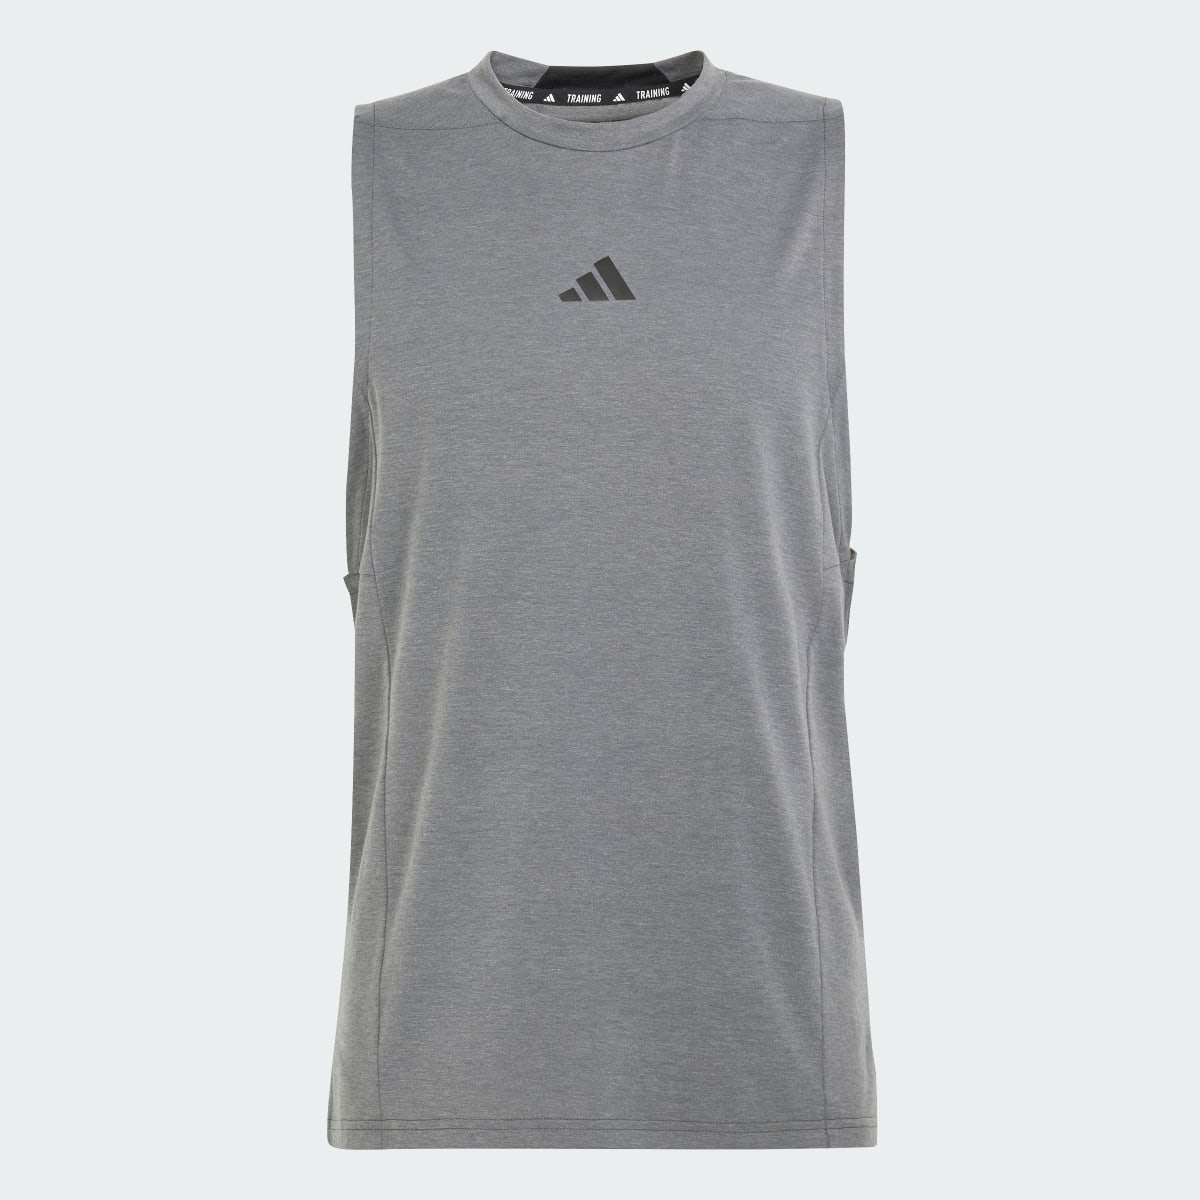 Adidas Designed for Training Workout Tanktop. 5